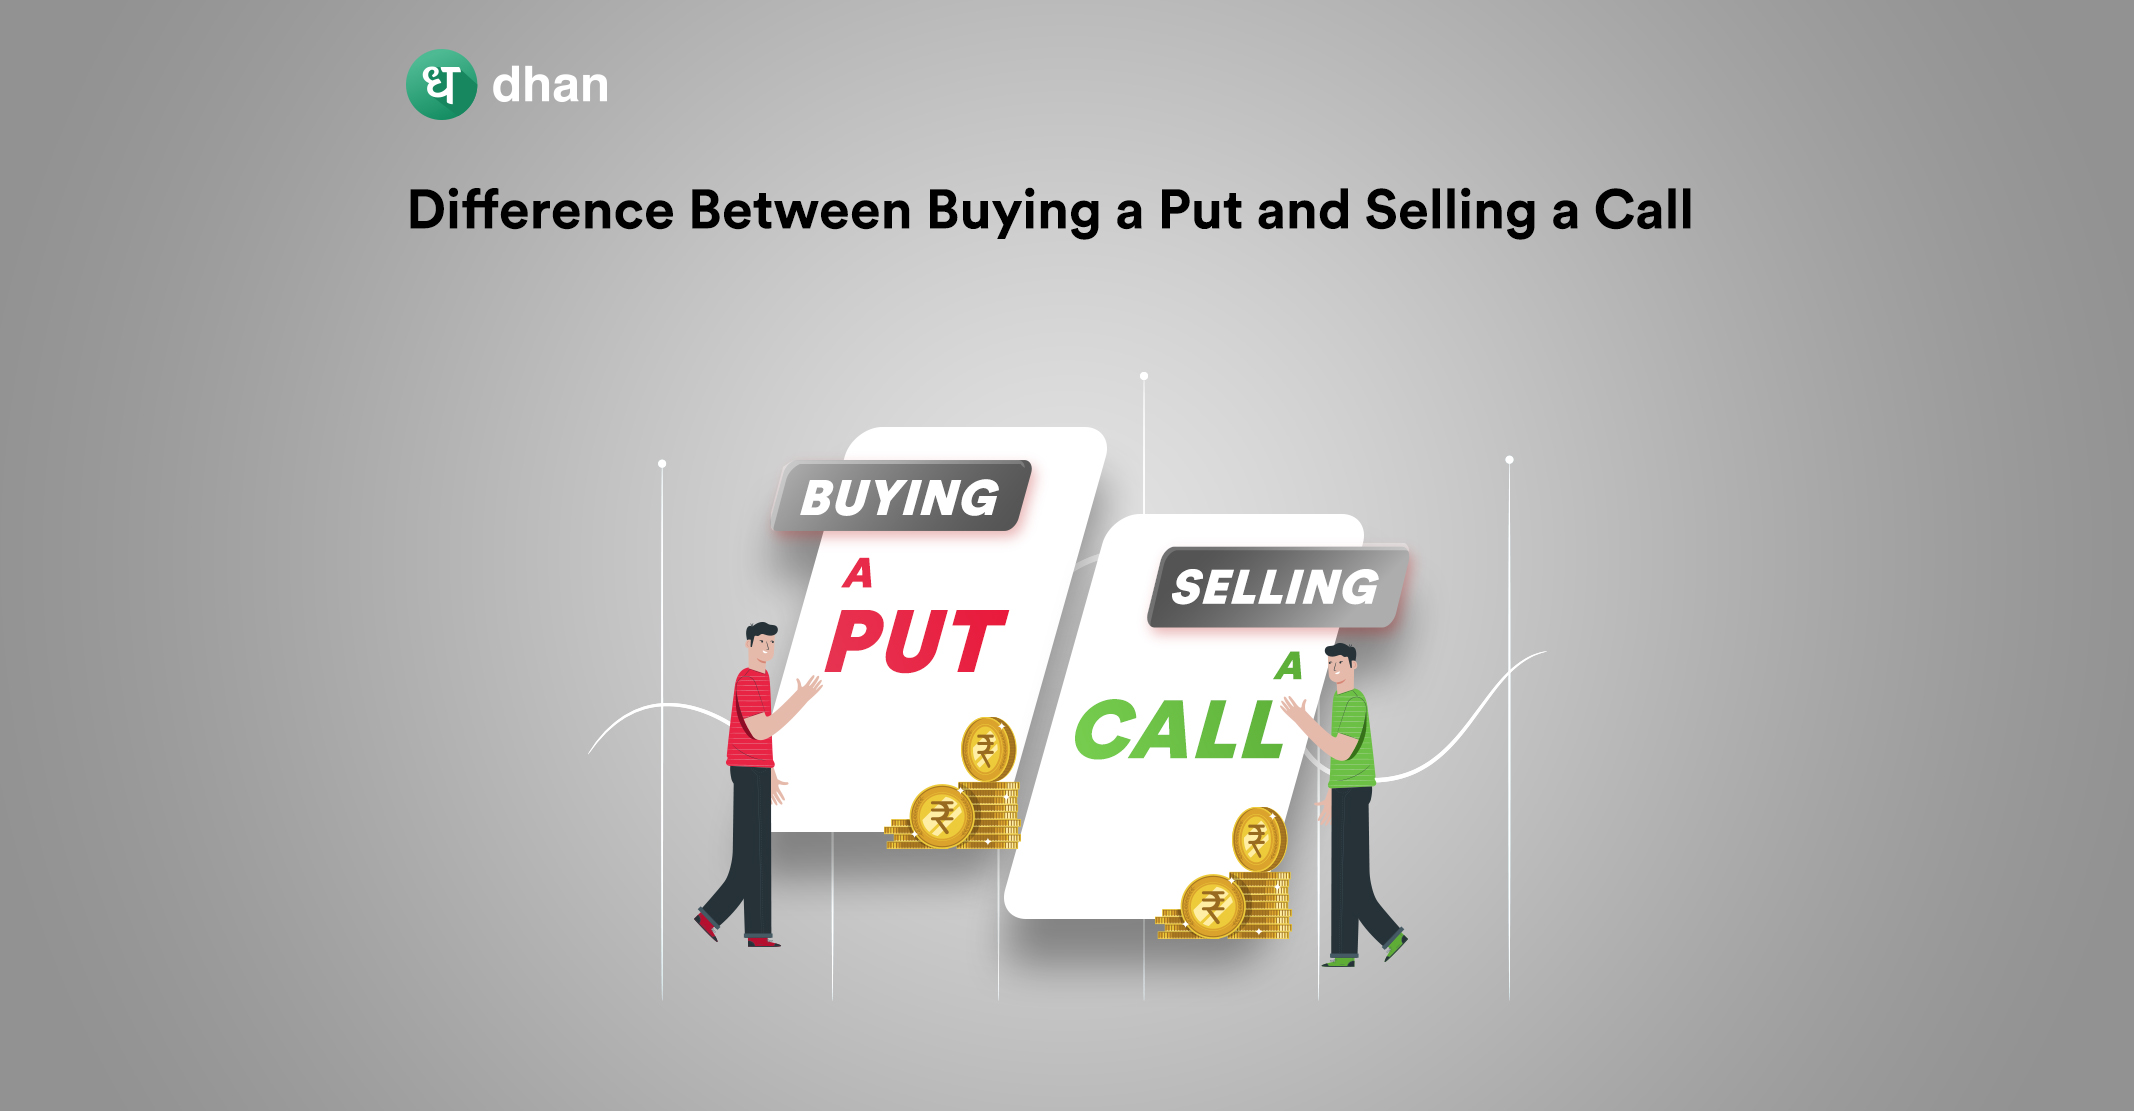 Difference Between Buying a Put vs Selling a Call